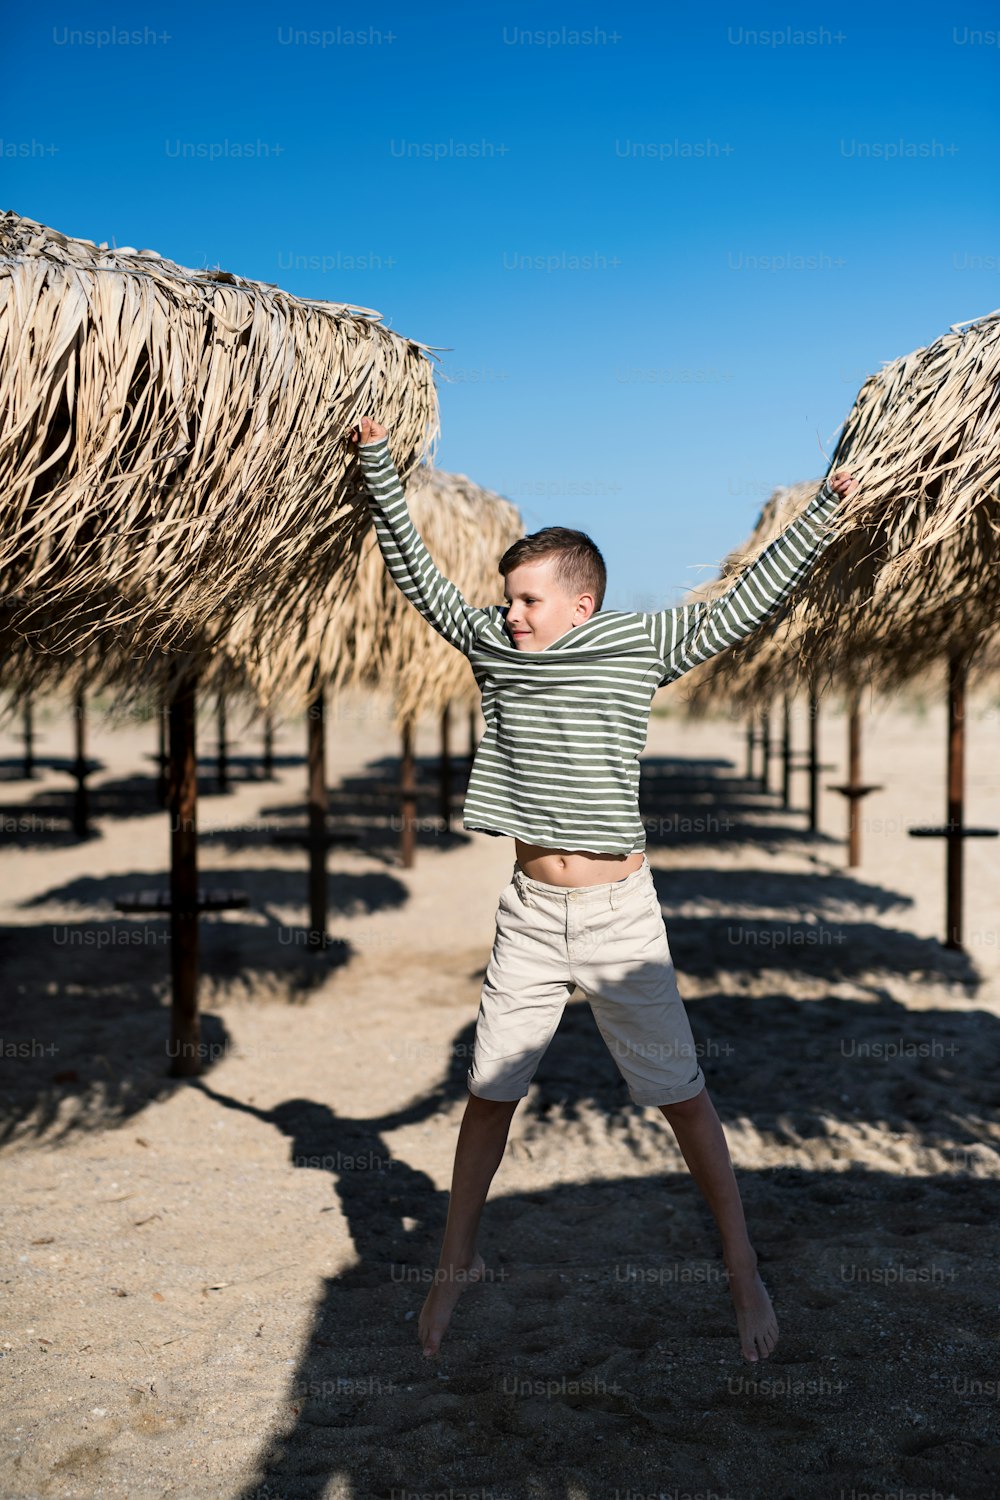 A cheerful small boy playing outdoors on sand beach, jumping.